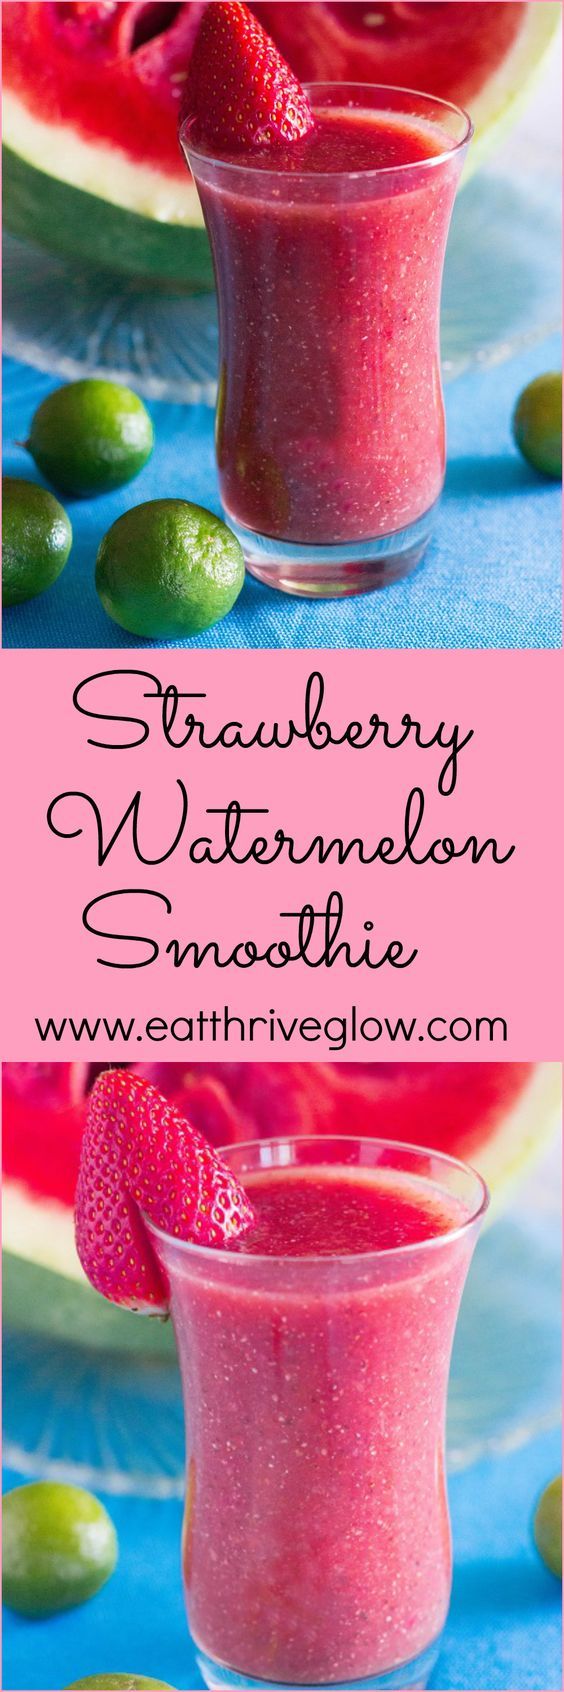 Check out easy healthy smoothie recipes in this awesome post. | easy smoothie recipe | power smoothies for breakfast | healthy breakfast smoothie for breakfast | healthy smoothies #health #nutrition #mealprep #healthyliving #healthylifestyle #healthier #wellness #diet